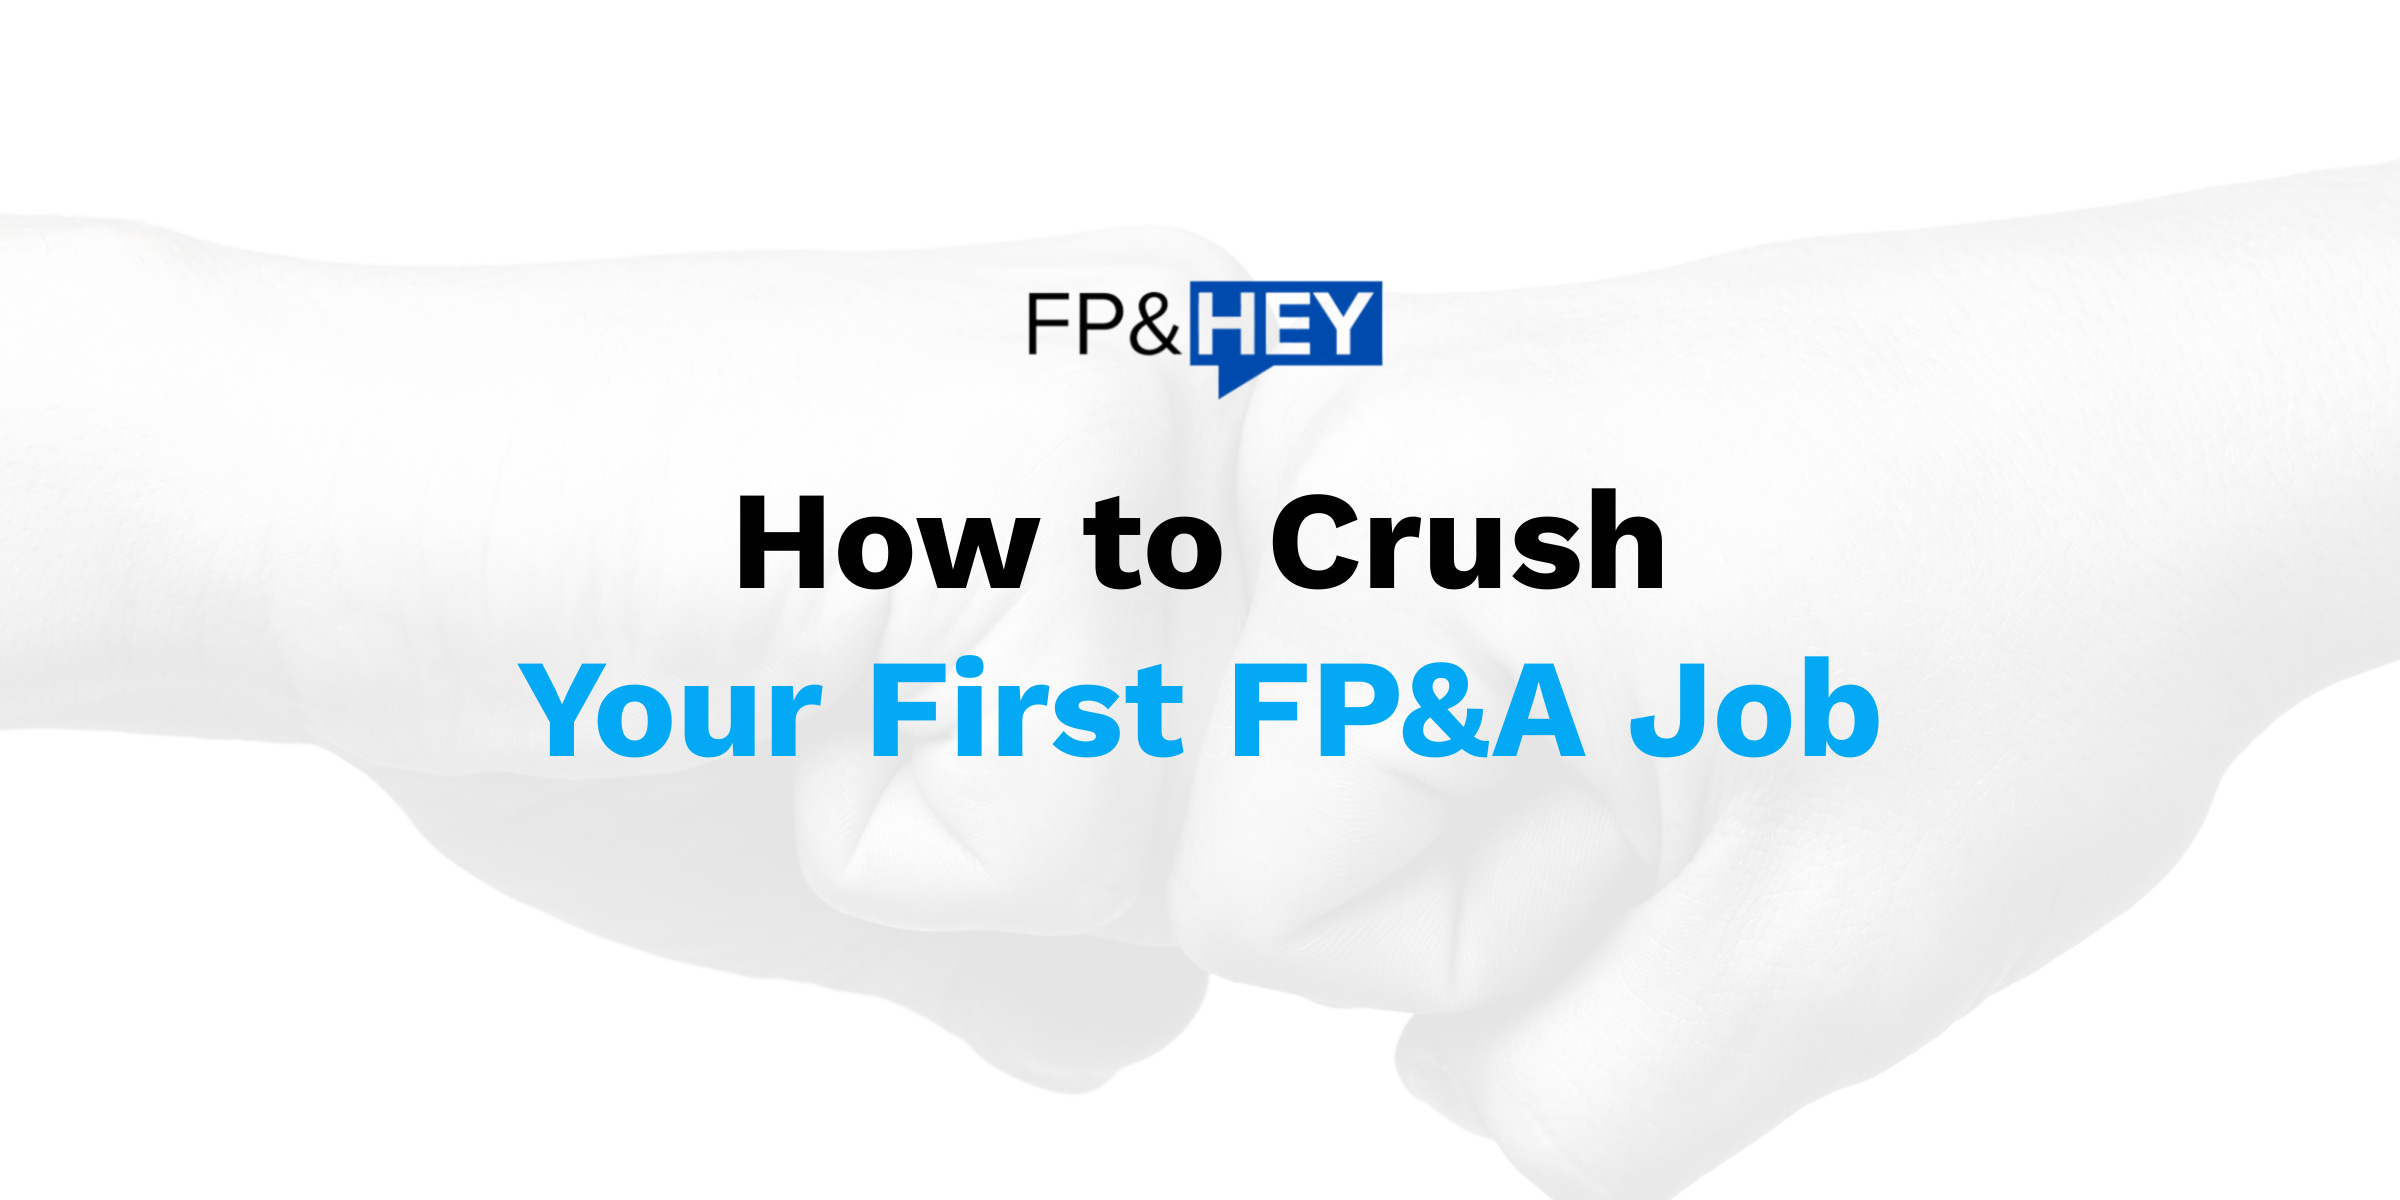 How to Crush Your First FP&A Job